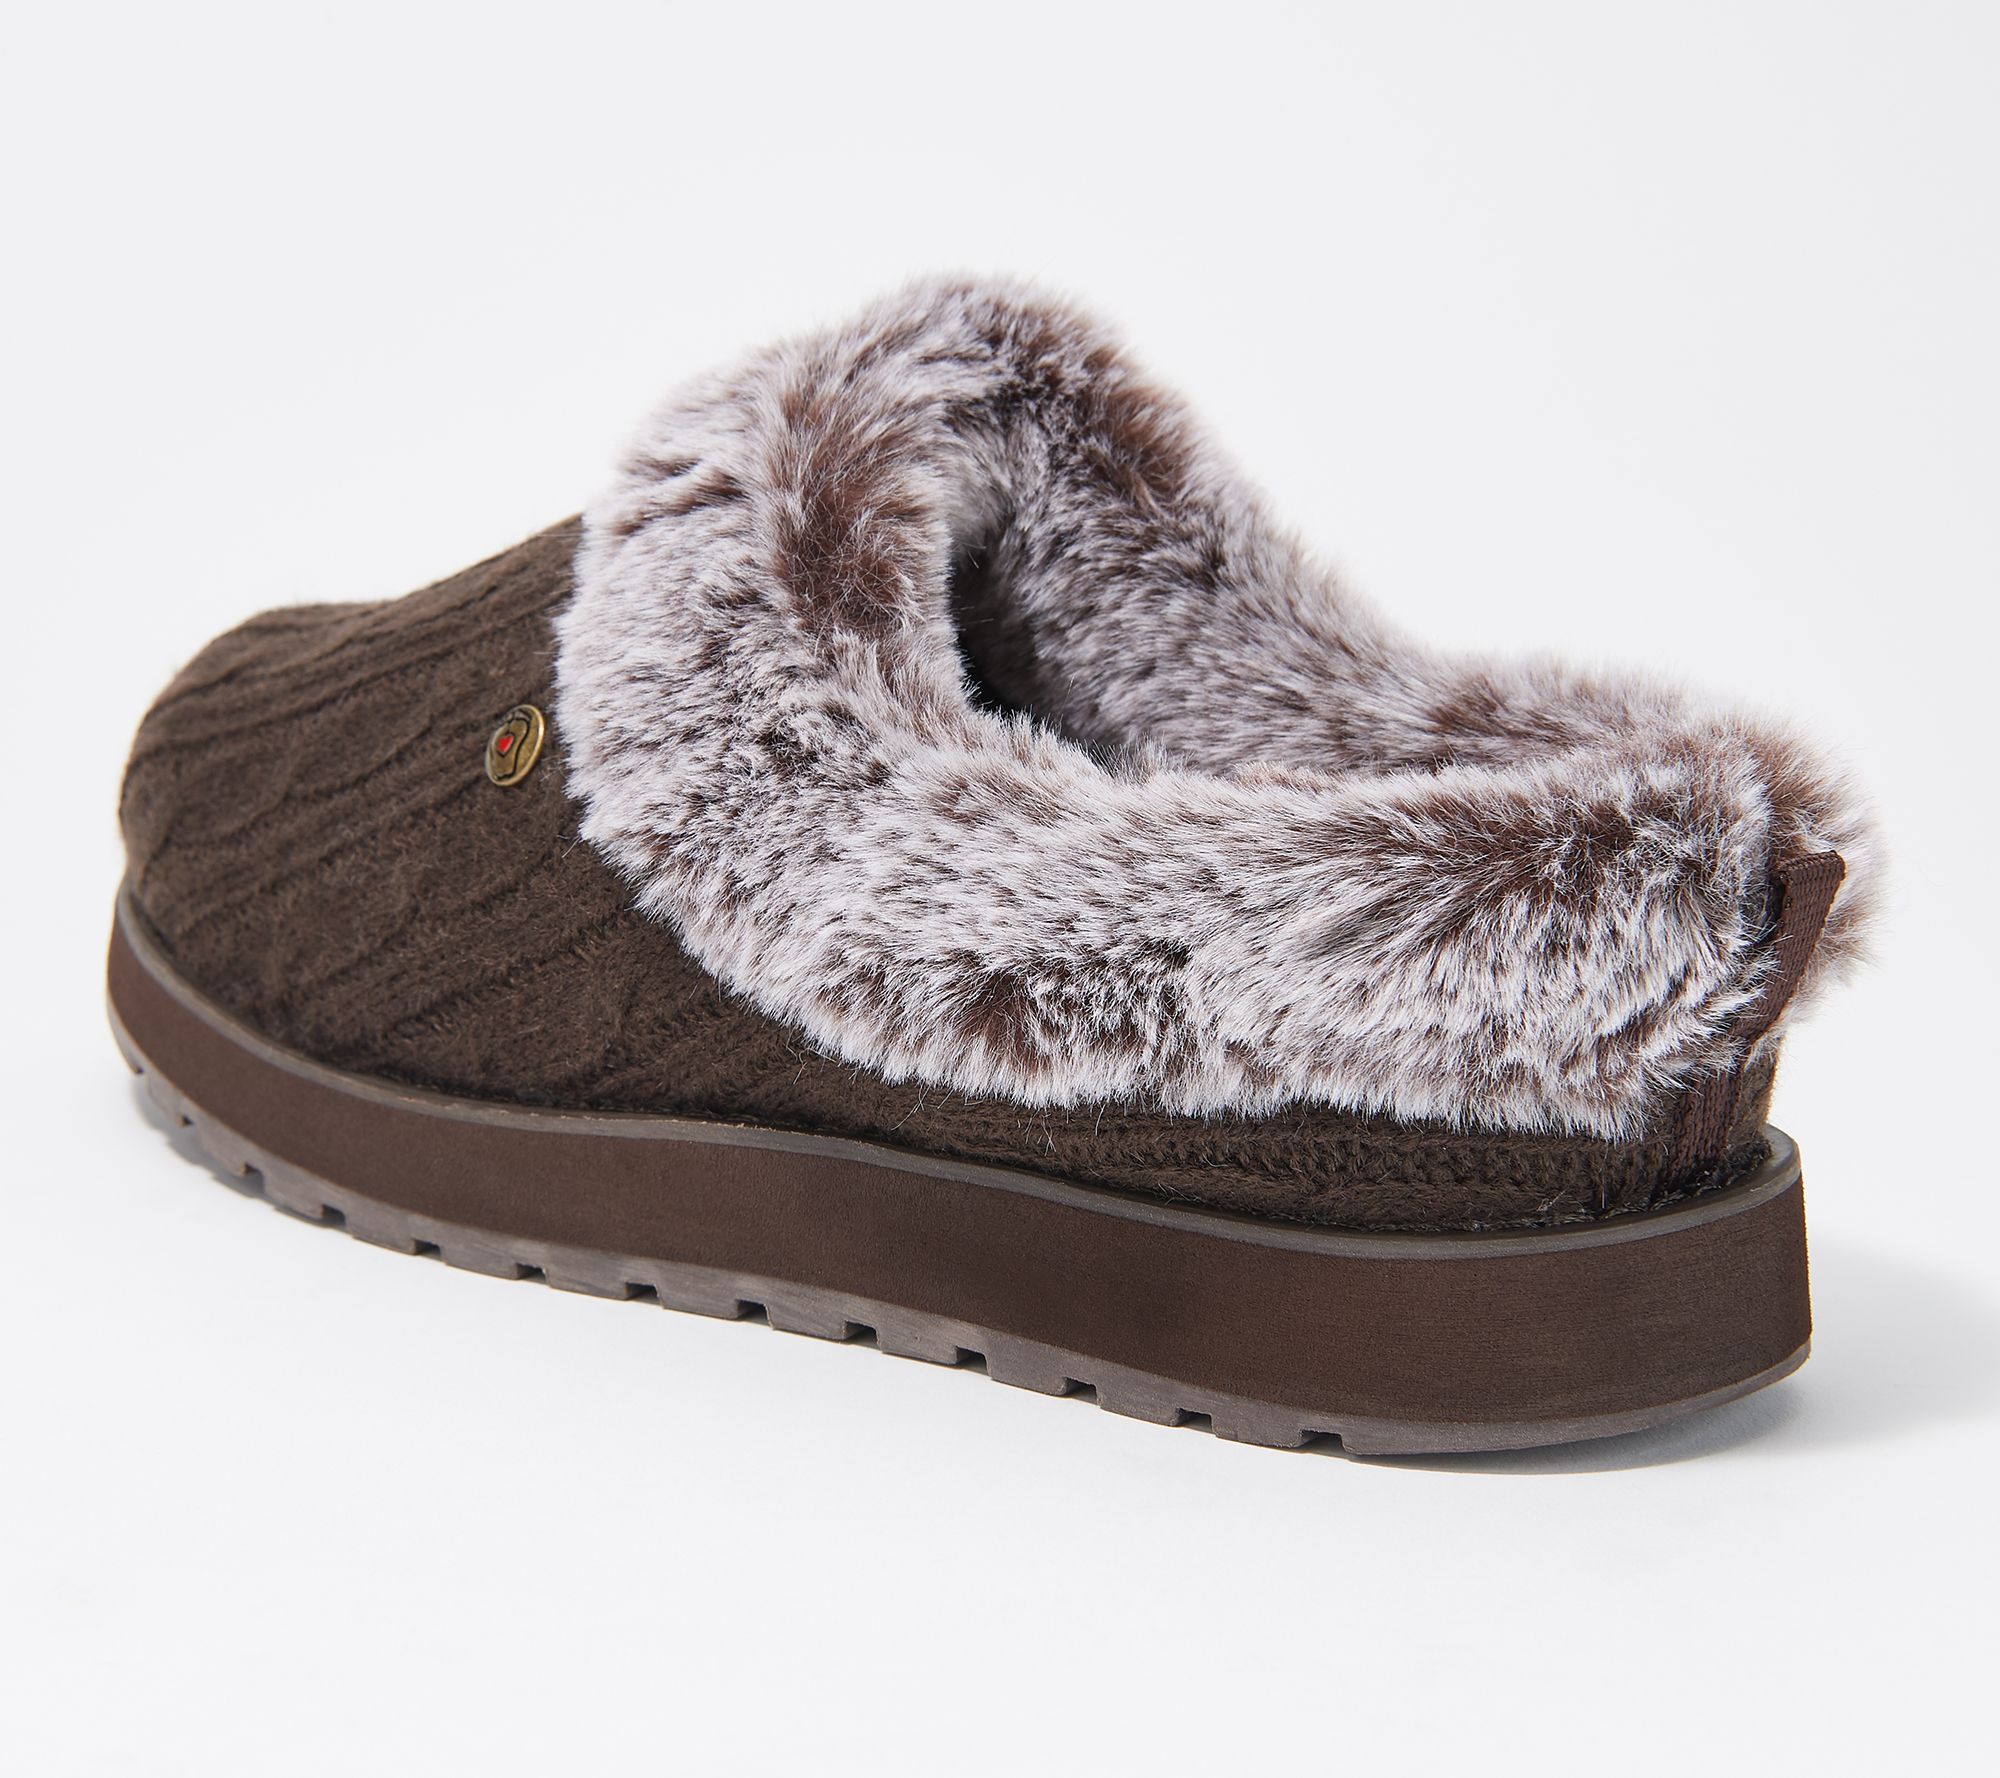 HARD SOLE FAUX FUR LINED SWEATER KNIT CLOG WOMENS SLIPPERS 